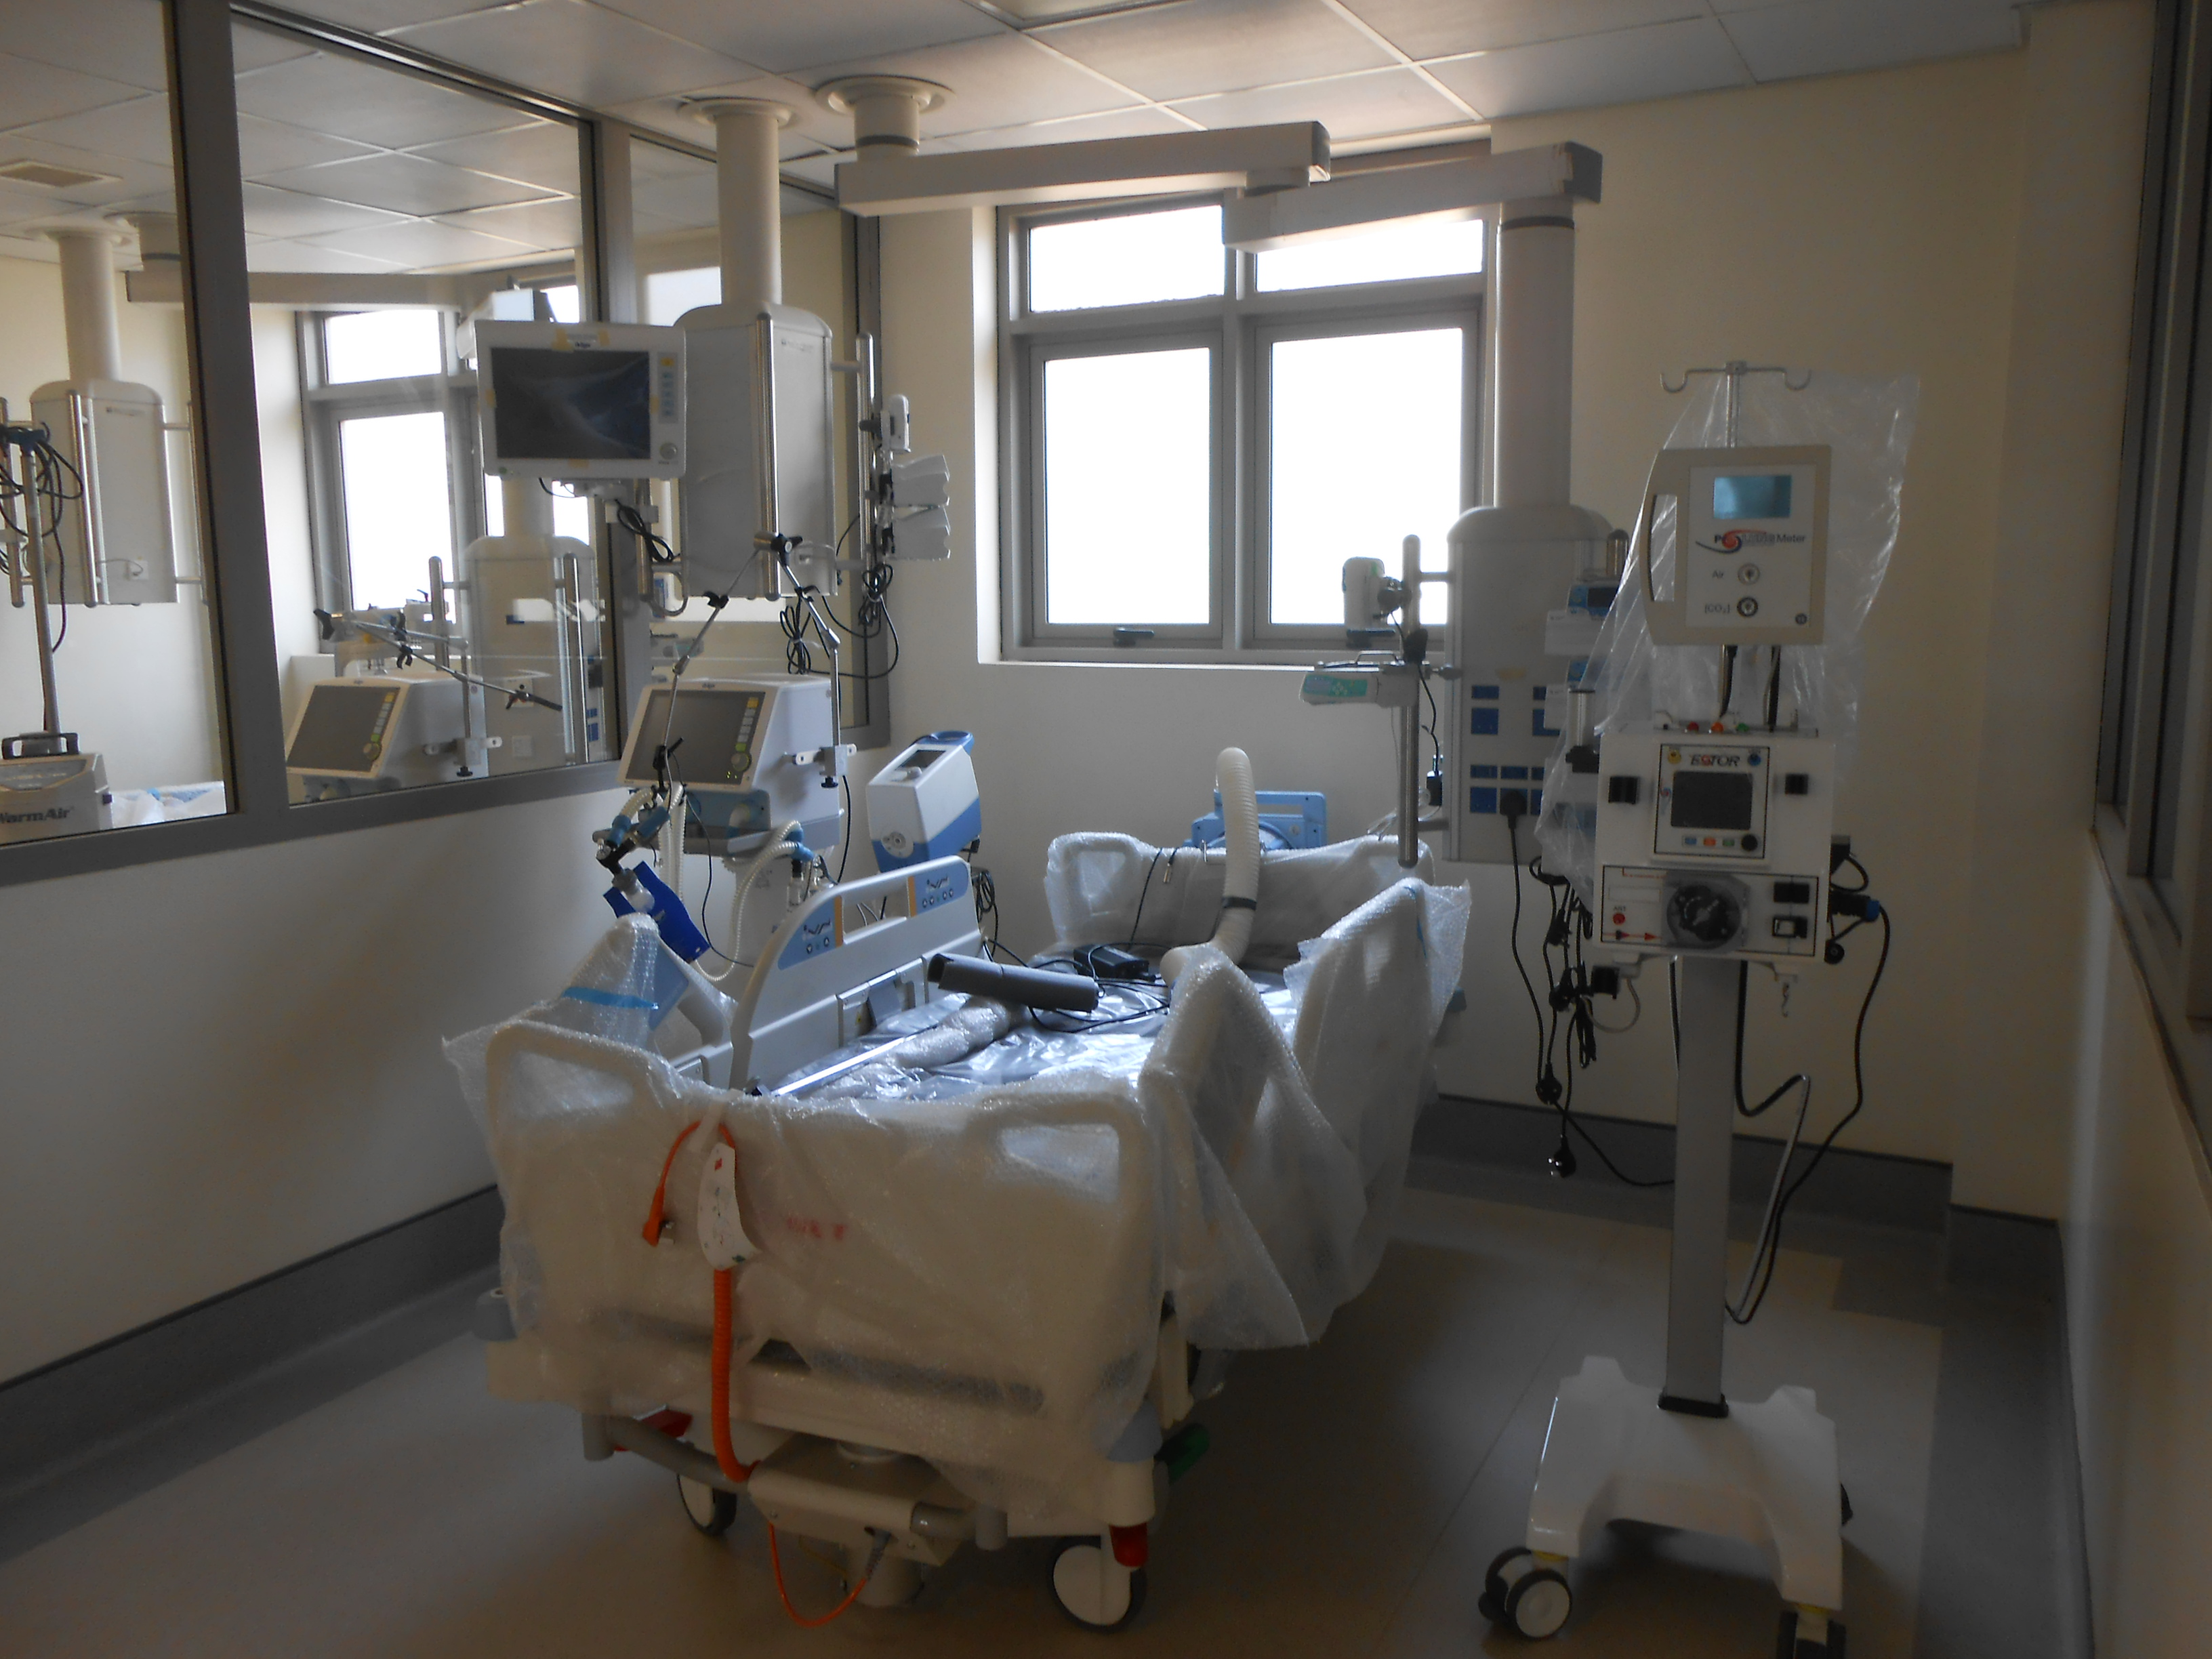 Typical ICU bed